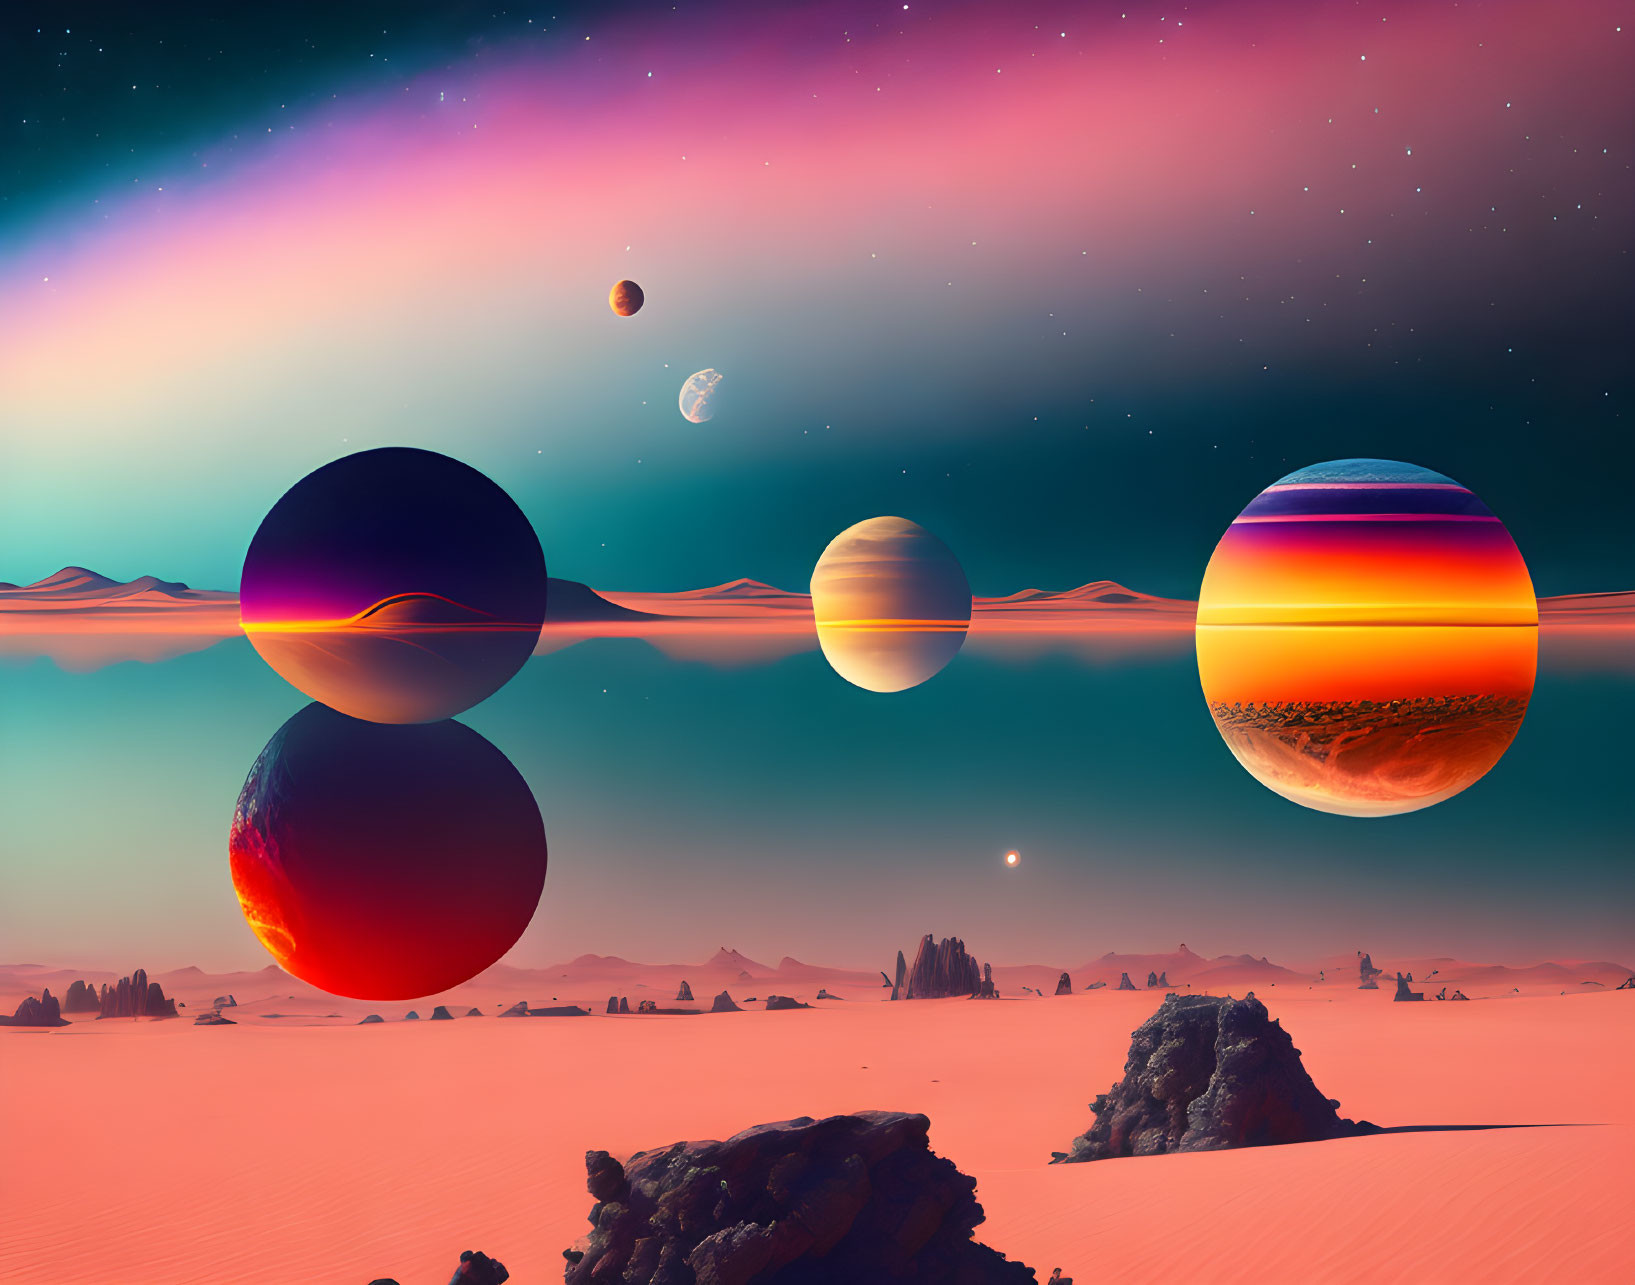 Colorful Sky Over Surreal Desert Landscape with Multiple Planets